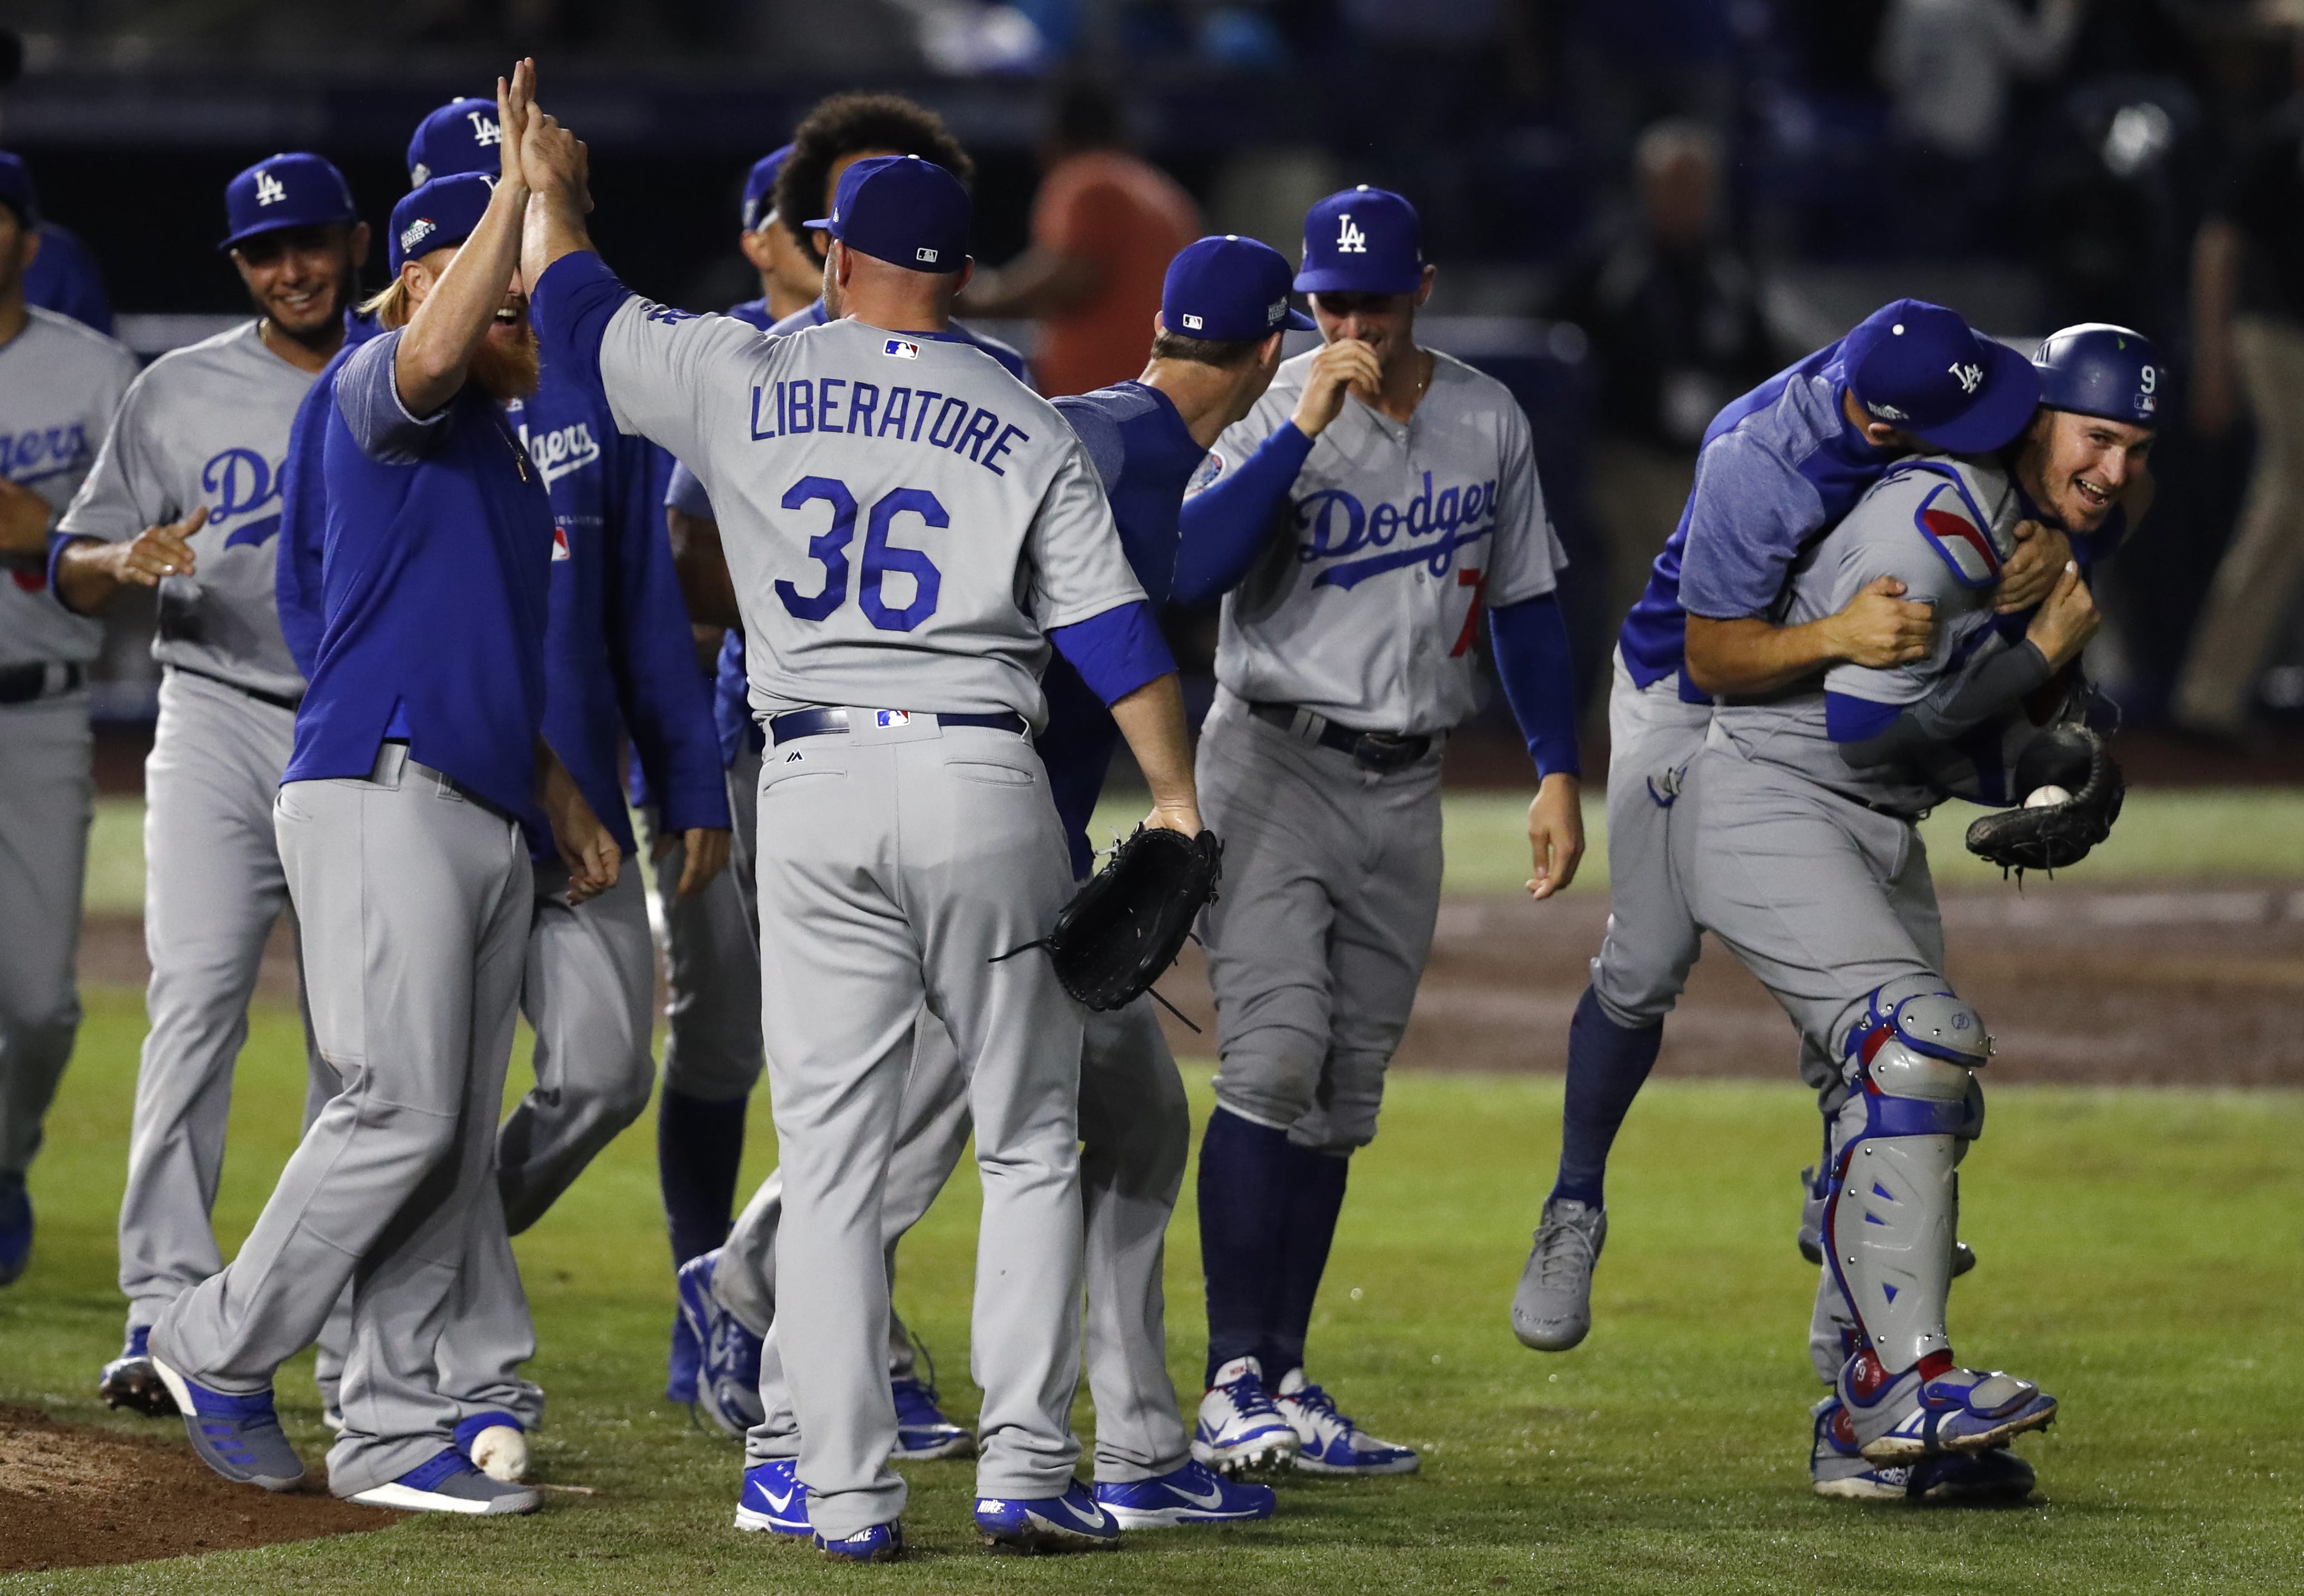 Los Angeles Dodgers catcher Yasmani Grandal, right, and relief pitcher Adam Liberatore (36) celebrate with teammates after the team's 4-0 win over the San Diego Padres in a baseball game in Monterrey, Mexico, Friday, May 4, 2018. Rookie Walker Buehler and a trio of Los Angeles relievers combined for the franchise's 23rd no-hitter in a 4-0 victory in the opener of a neutral-site series.